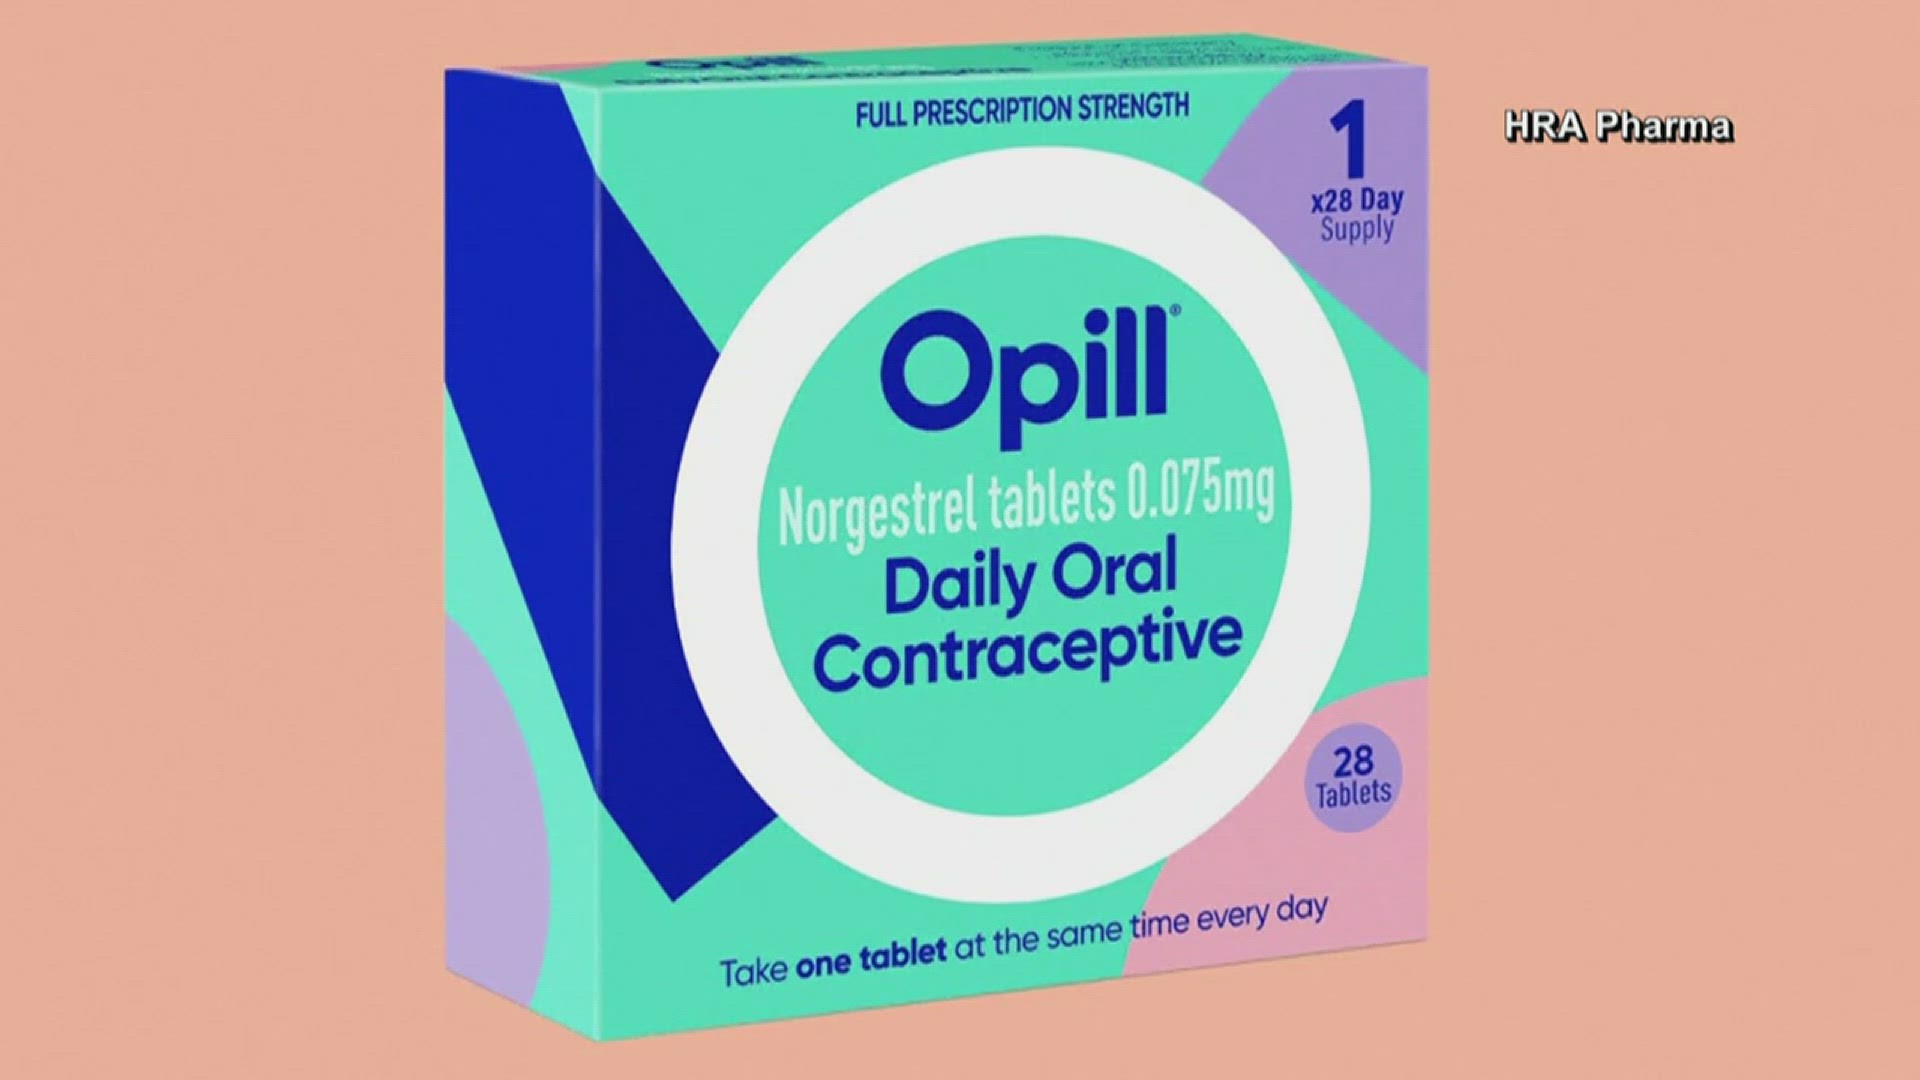 Previously all birth control pills required a prescription, though the once-a-day pills won't be available immediately.